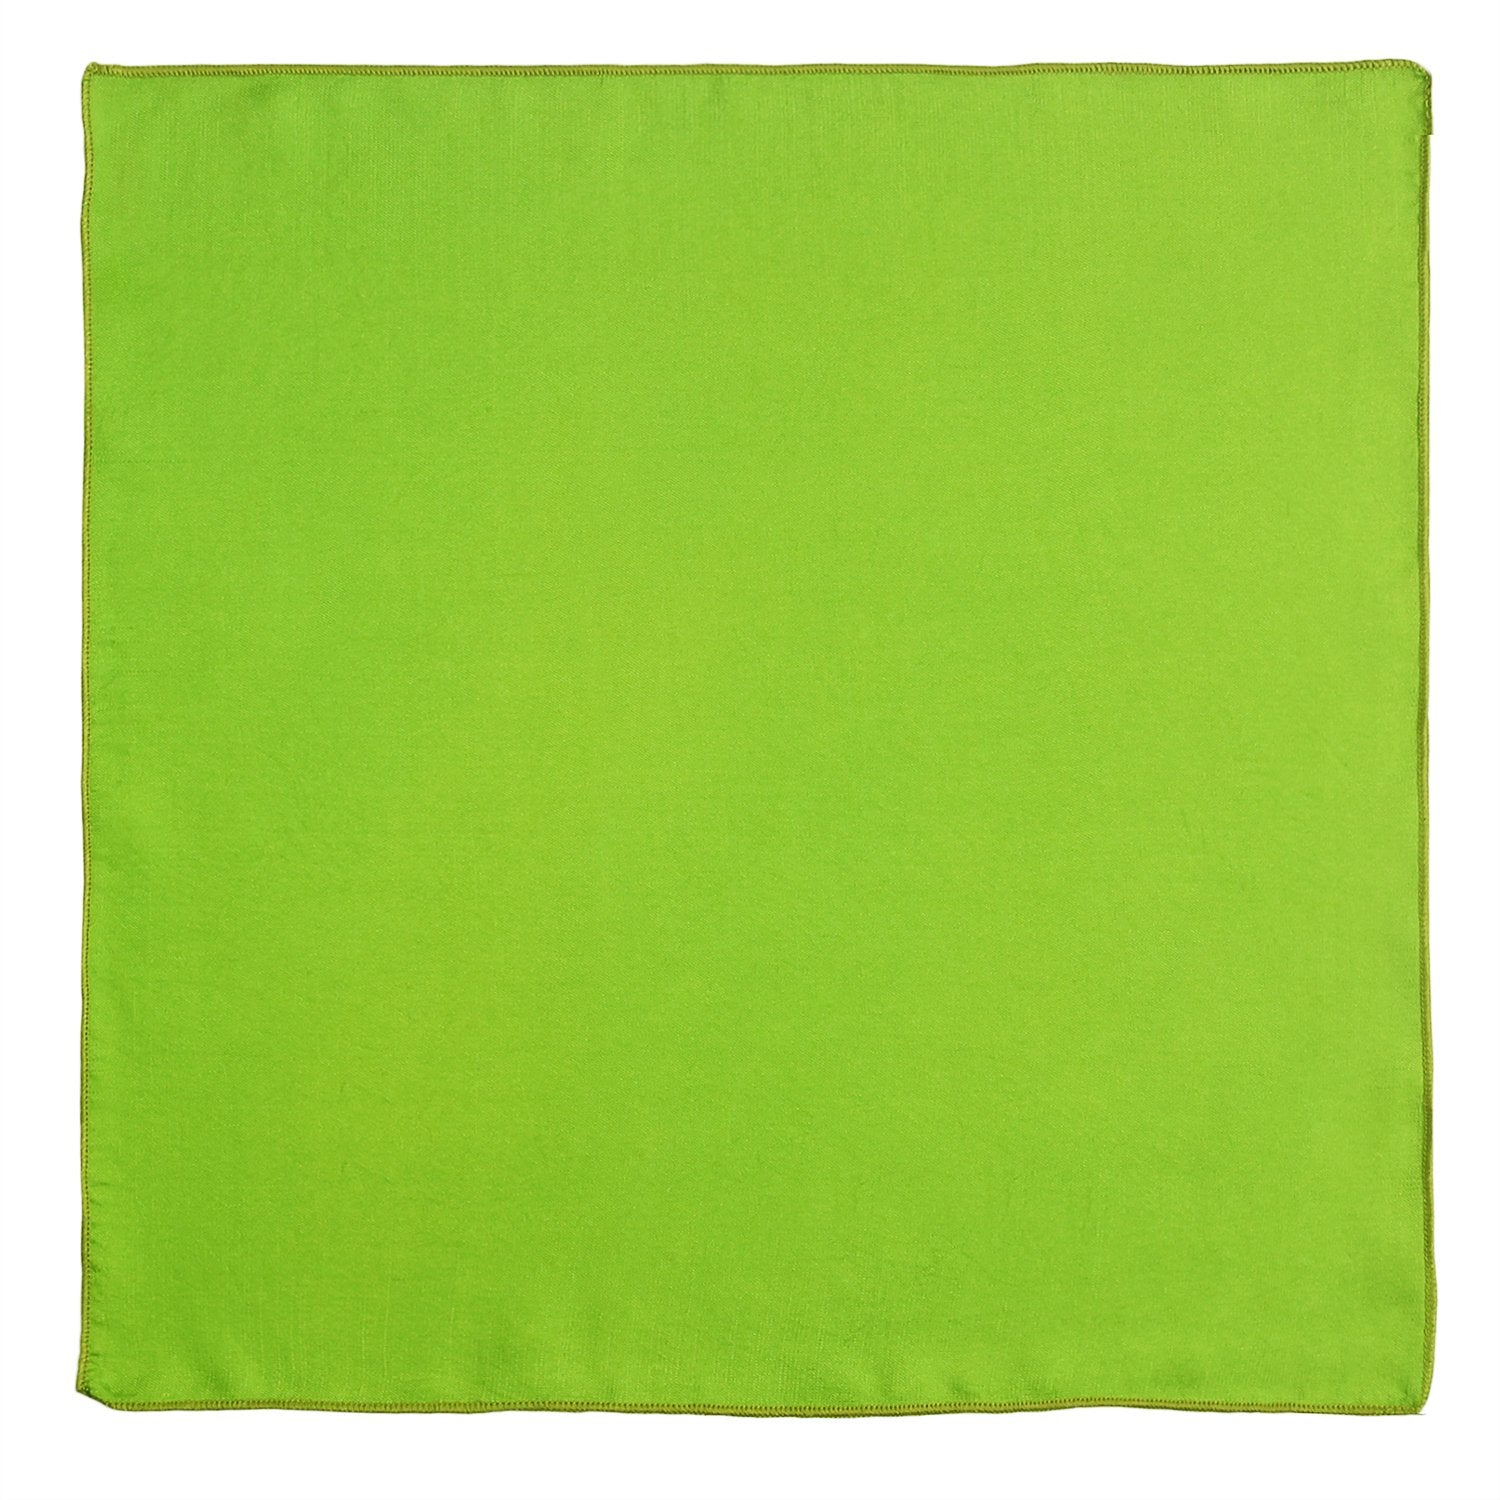 Chokore Bright Green Pure Silk Pocket Square, from the Solids Line